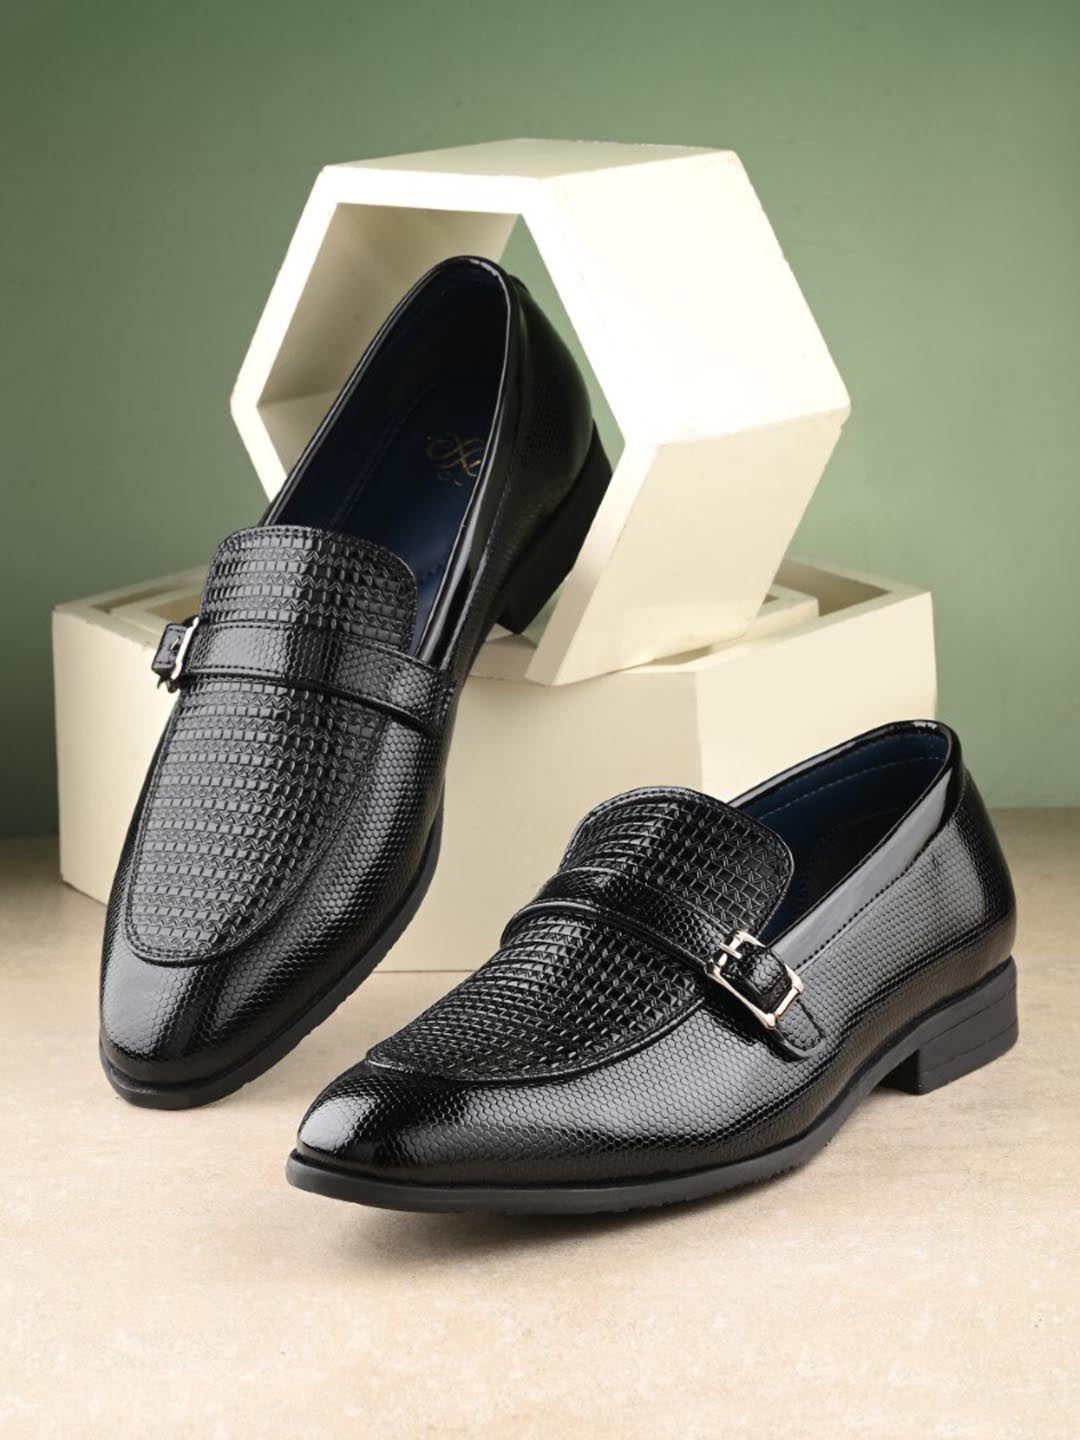 House of Pataudi Men Textured Buckled Formal Slip-On Loafers